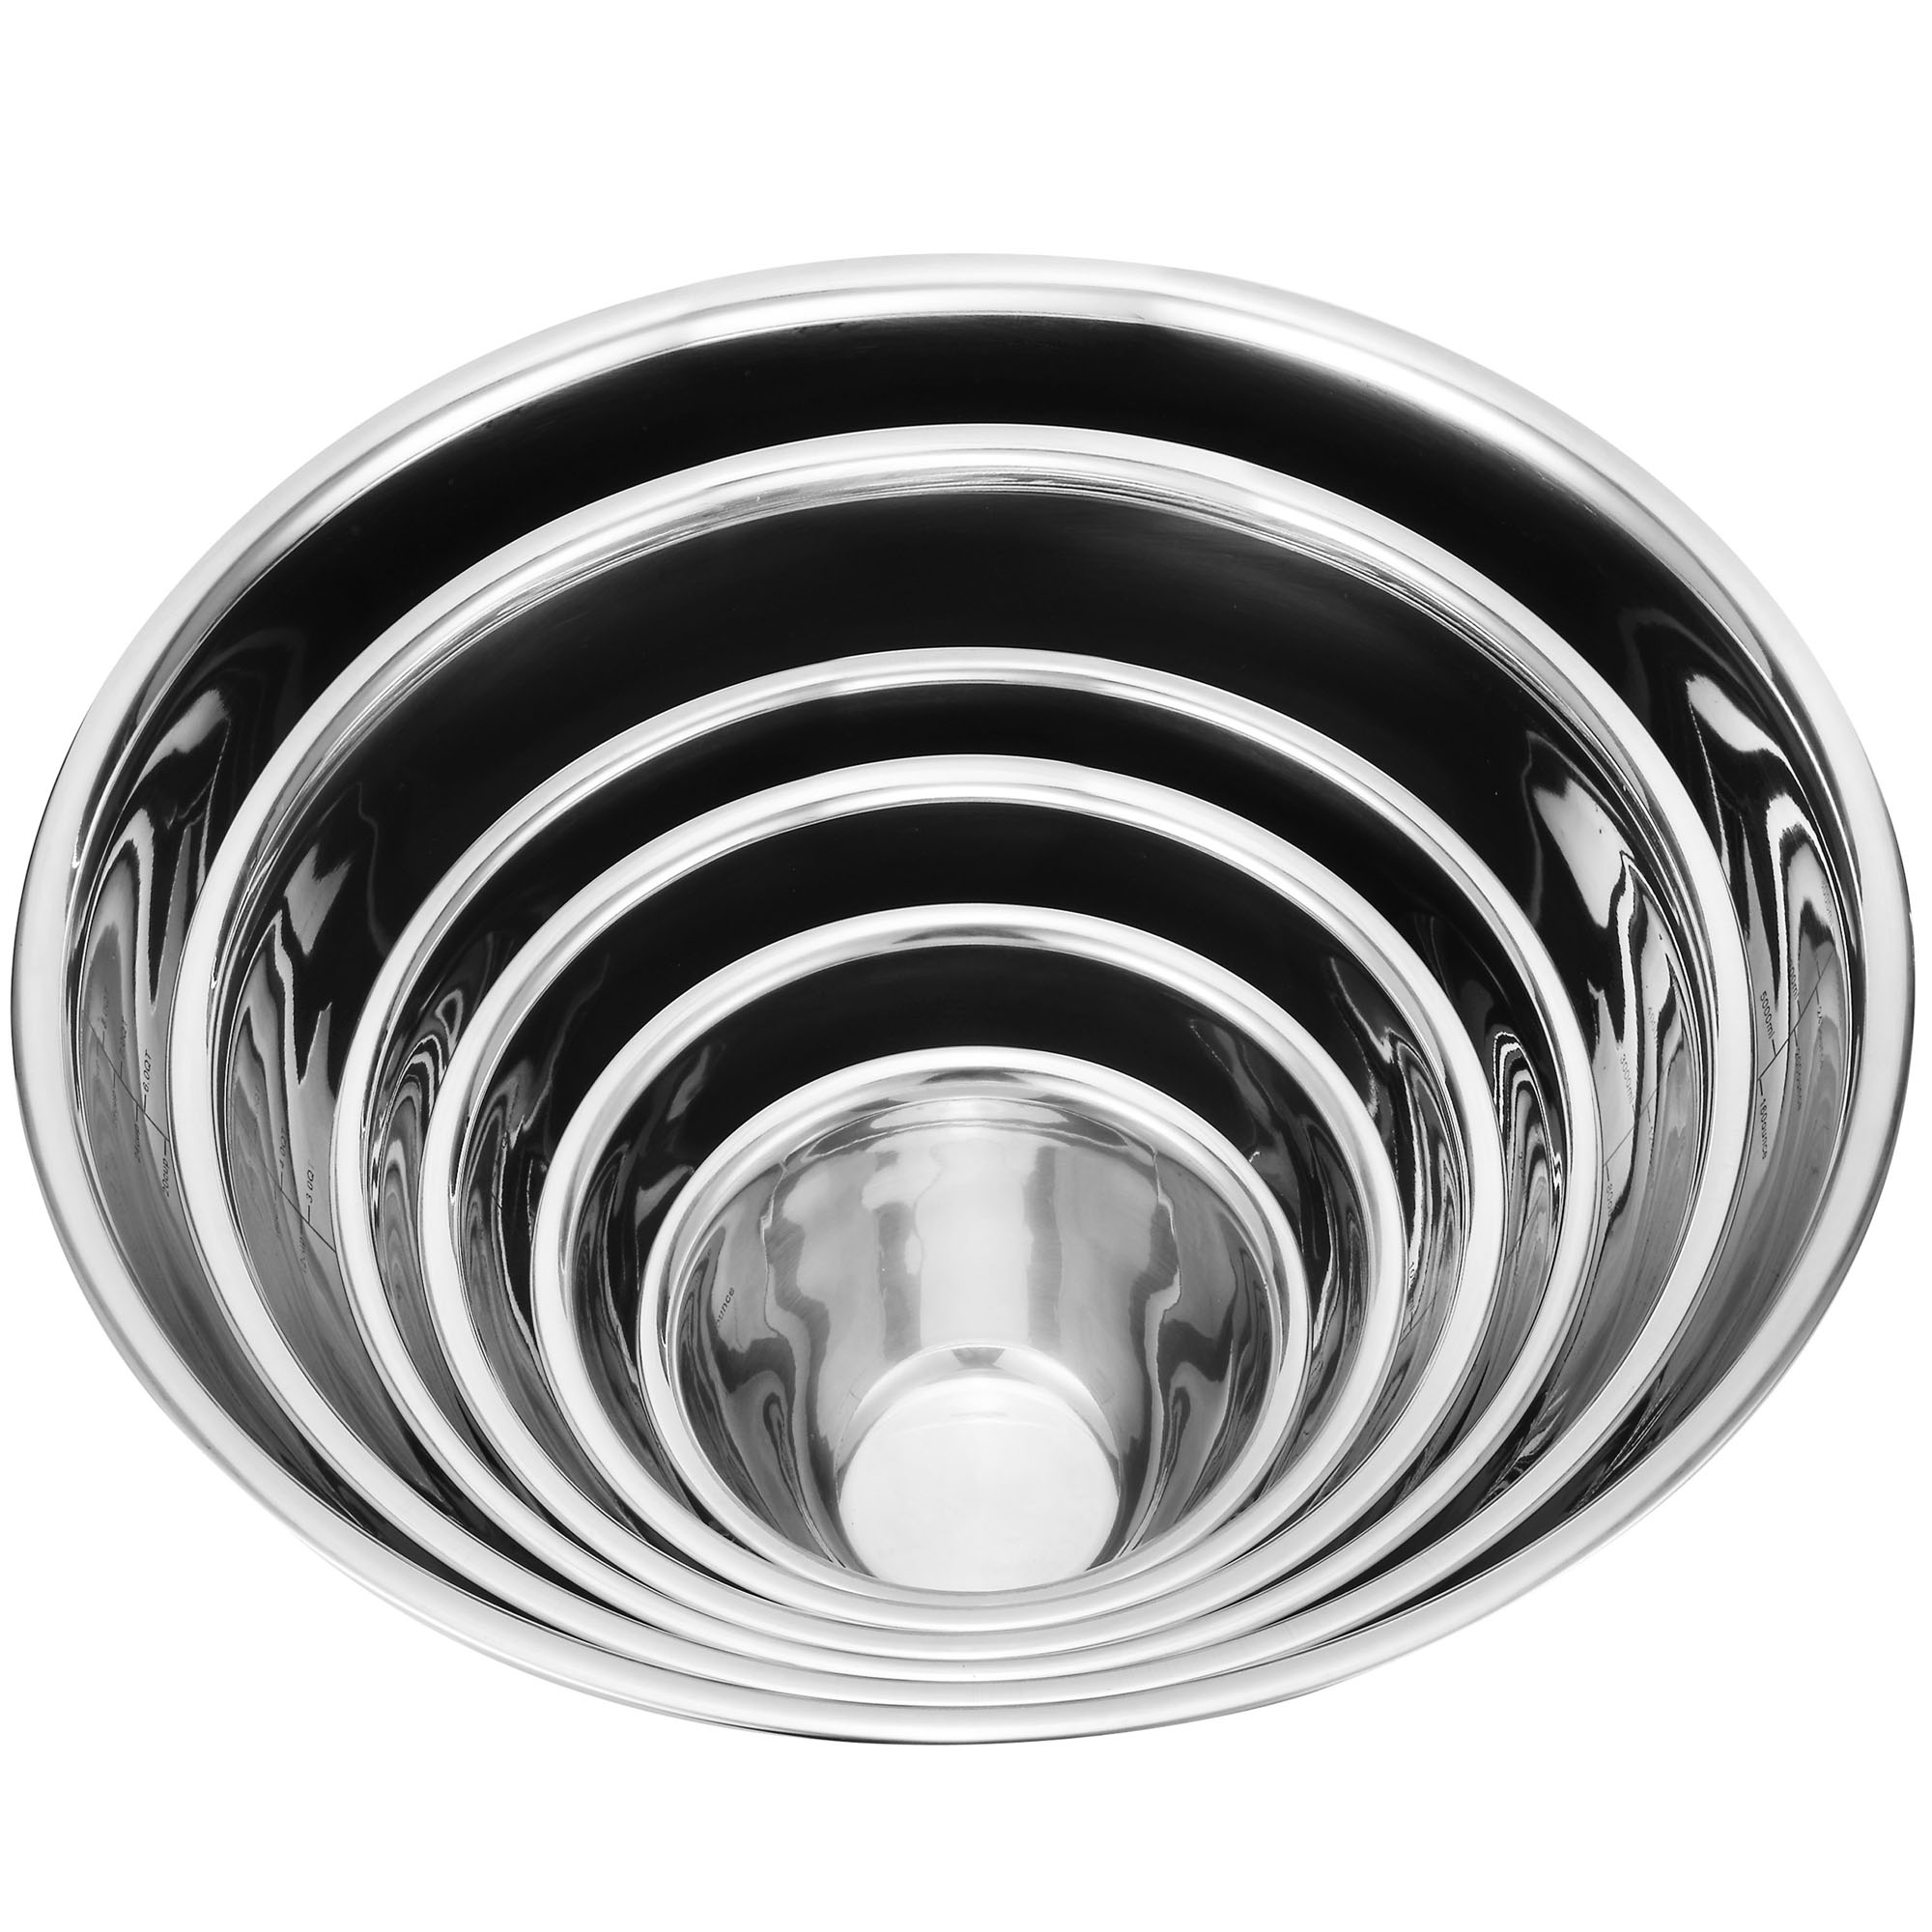 professional stainless steel mixing bowls